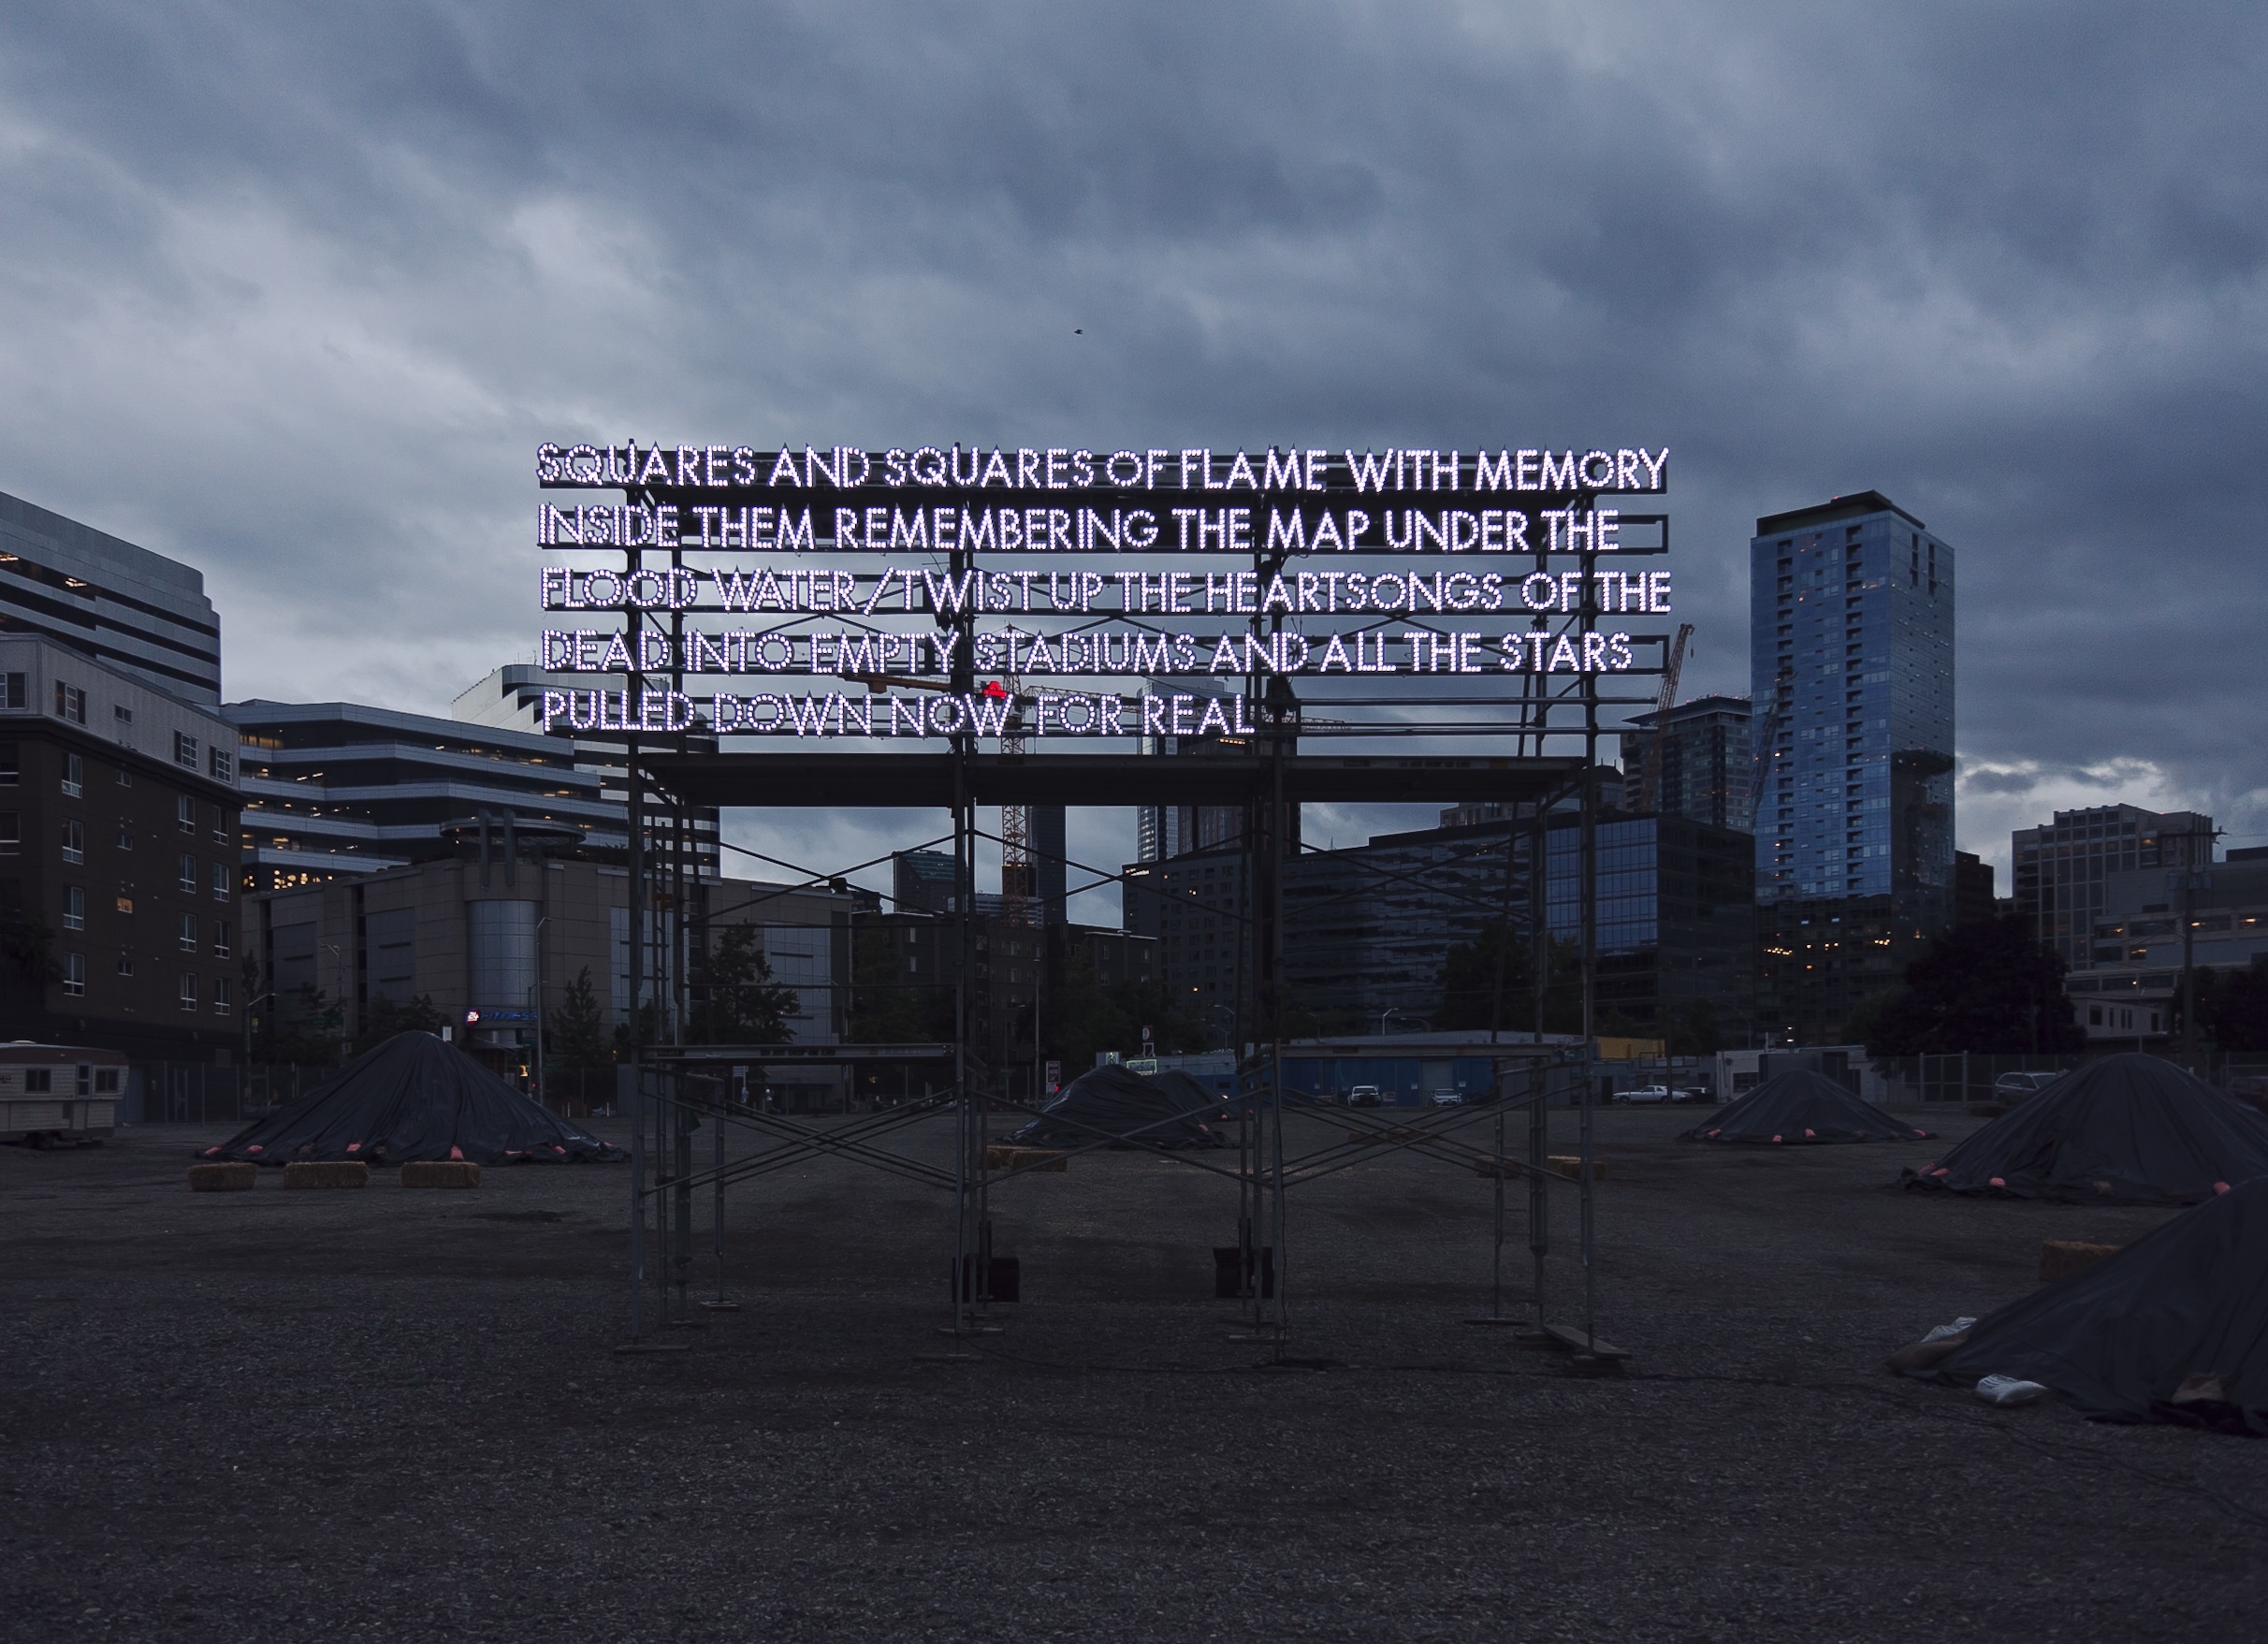 A billboard sculpture of white fluorescent lights reads “Squares and squares of flame with memory inside them remembering the map under the flood water/twist up the heart songs of the dead into empty stadiums and all the stars pulled down now for real”